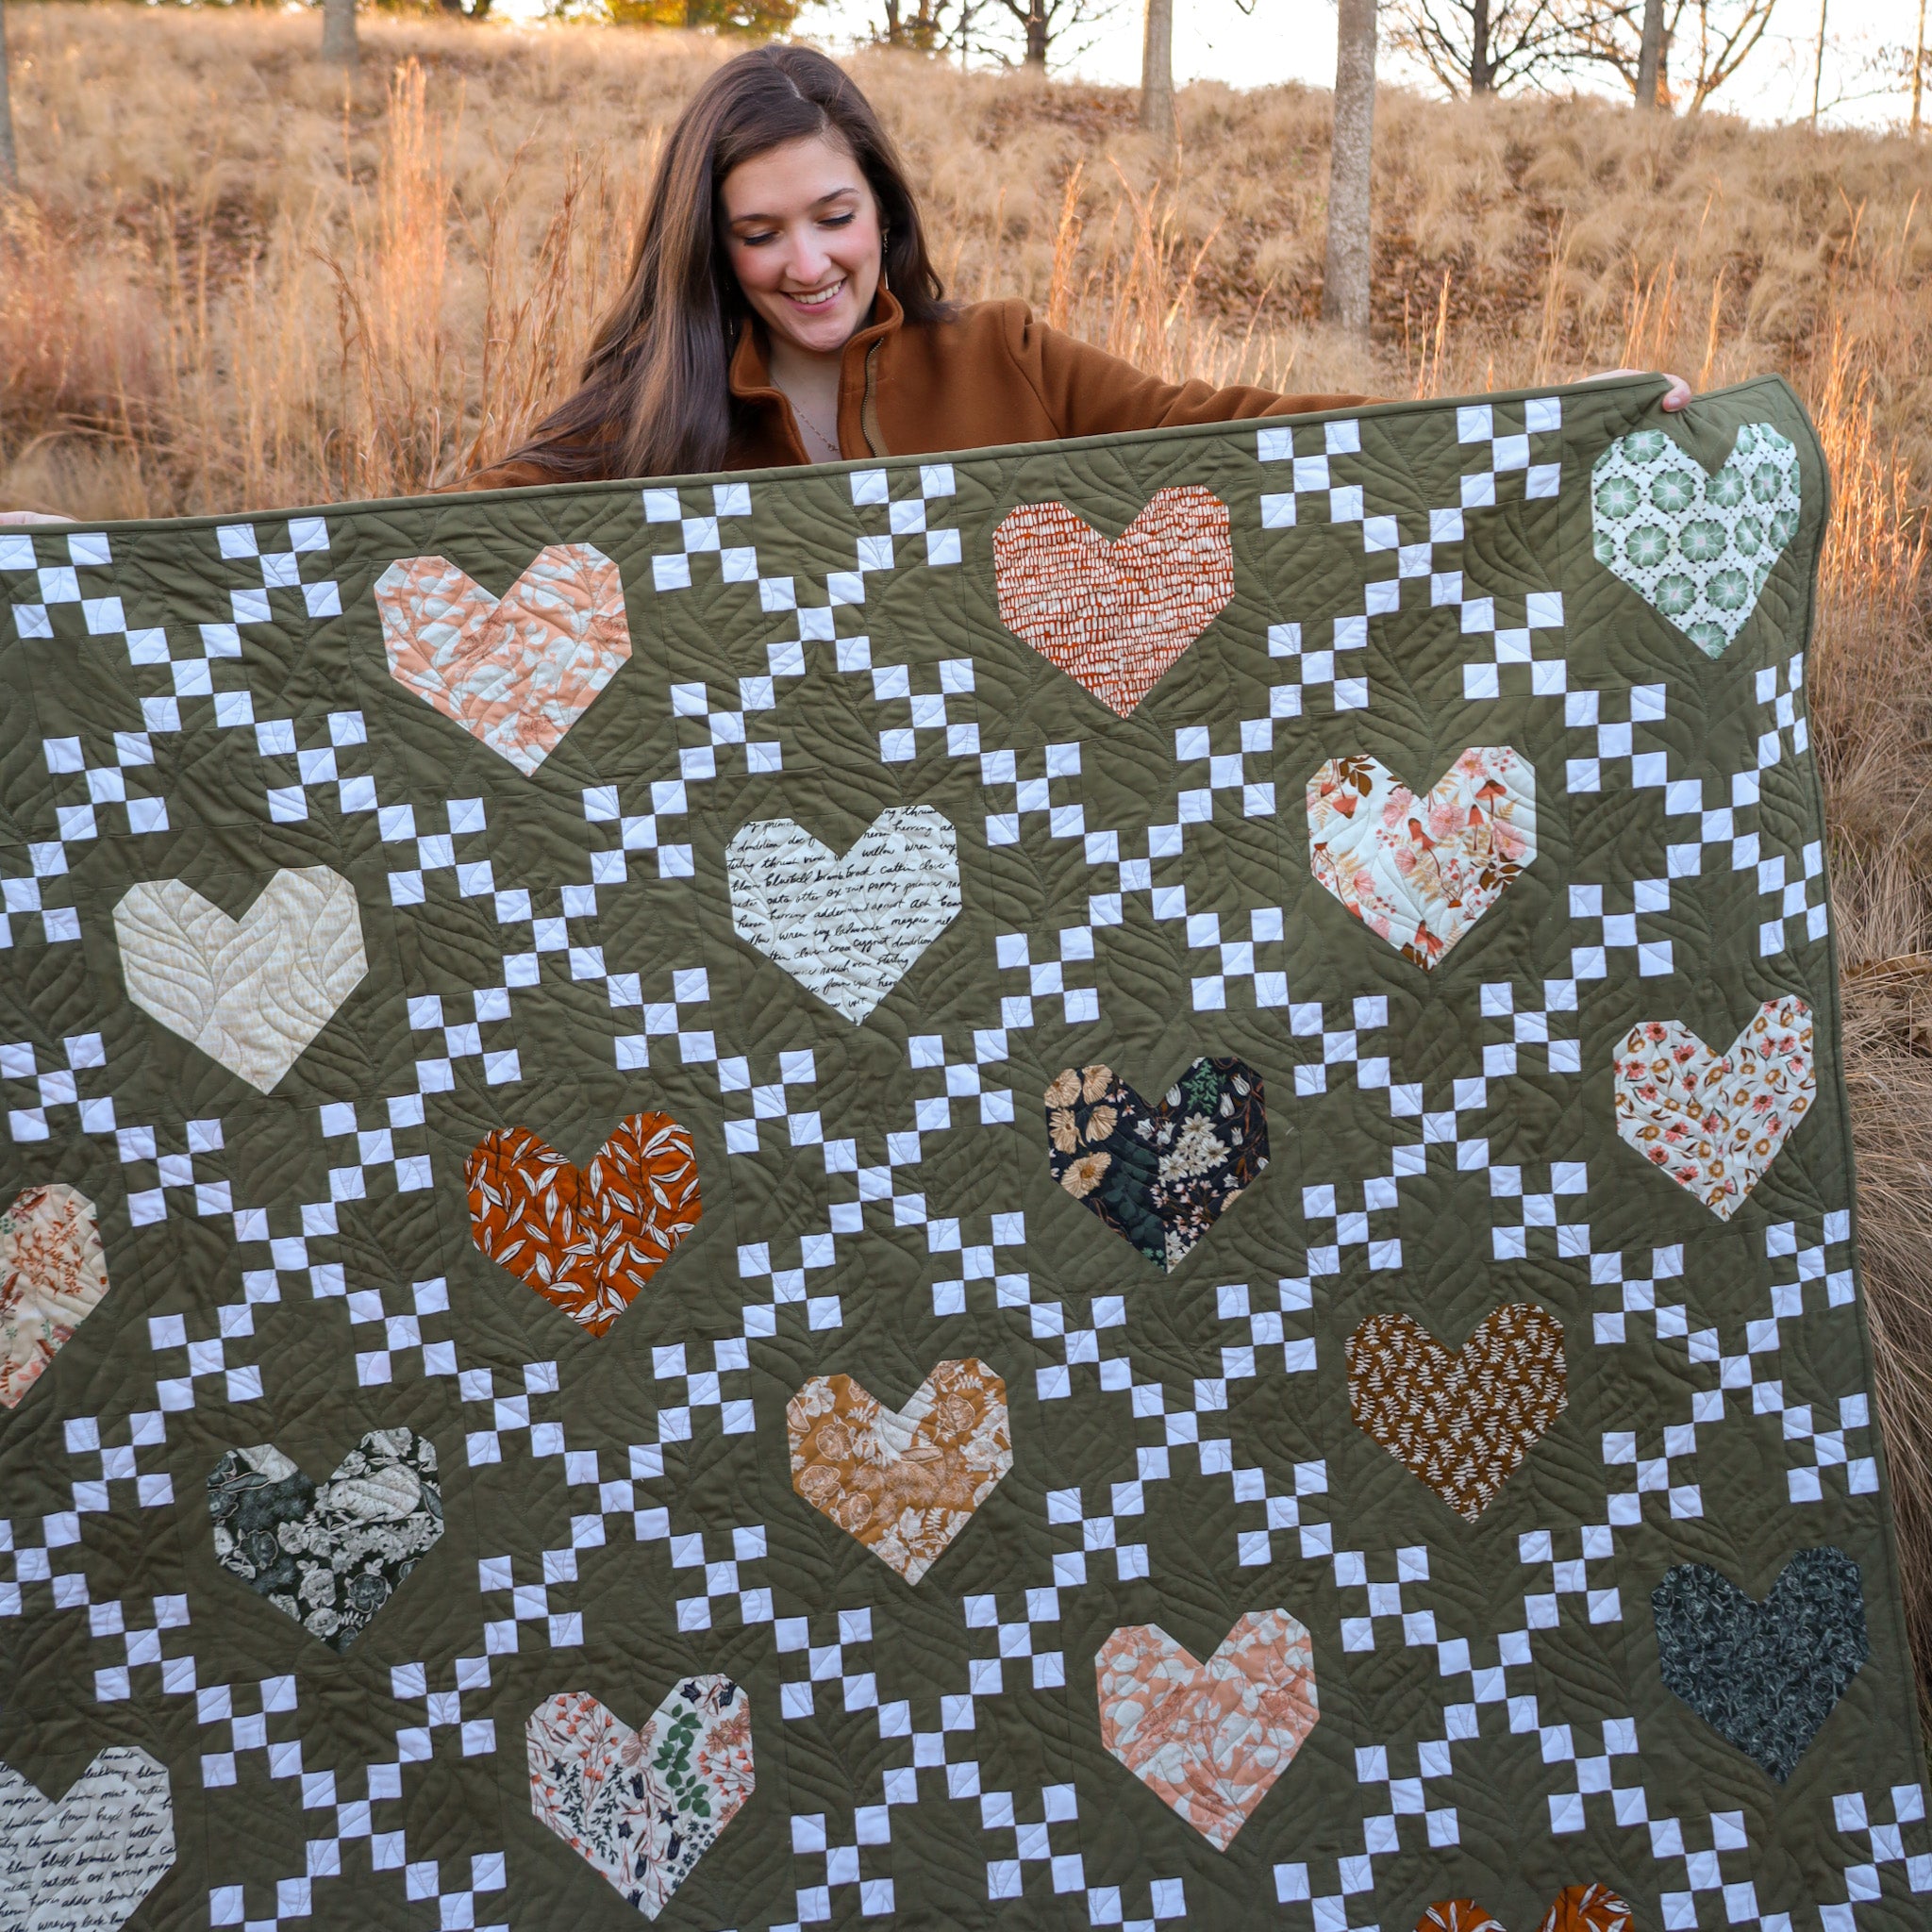 Heirloom Hearts Quilt - using the Wild Forgotten collection